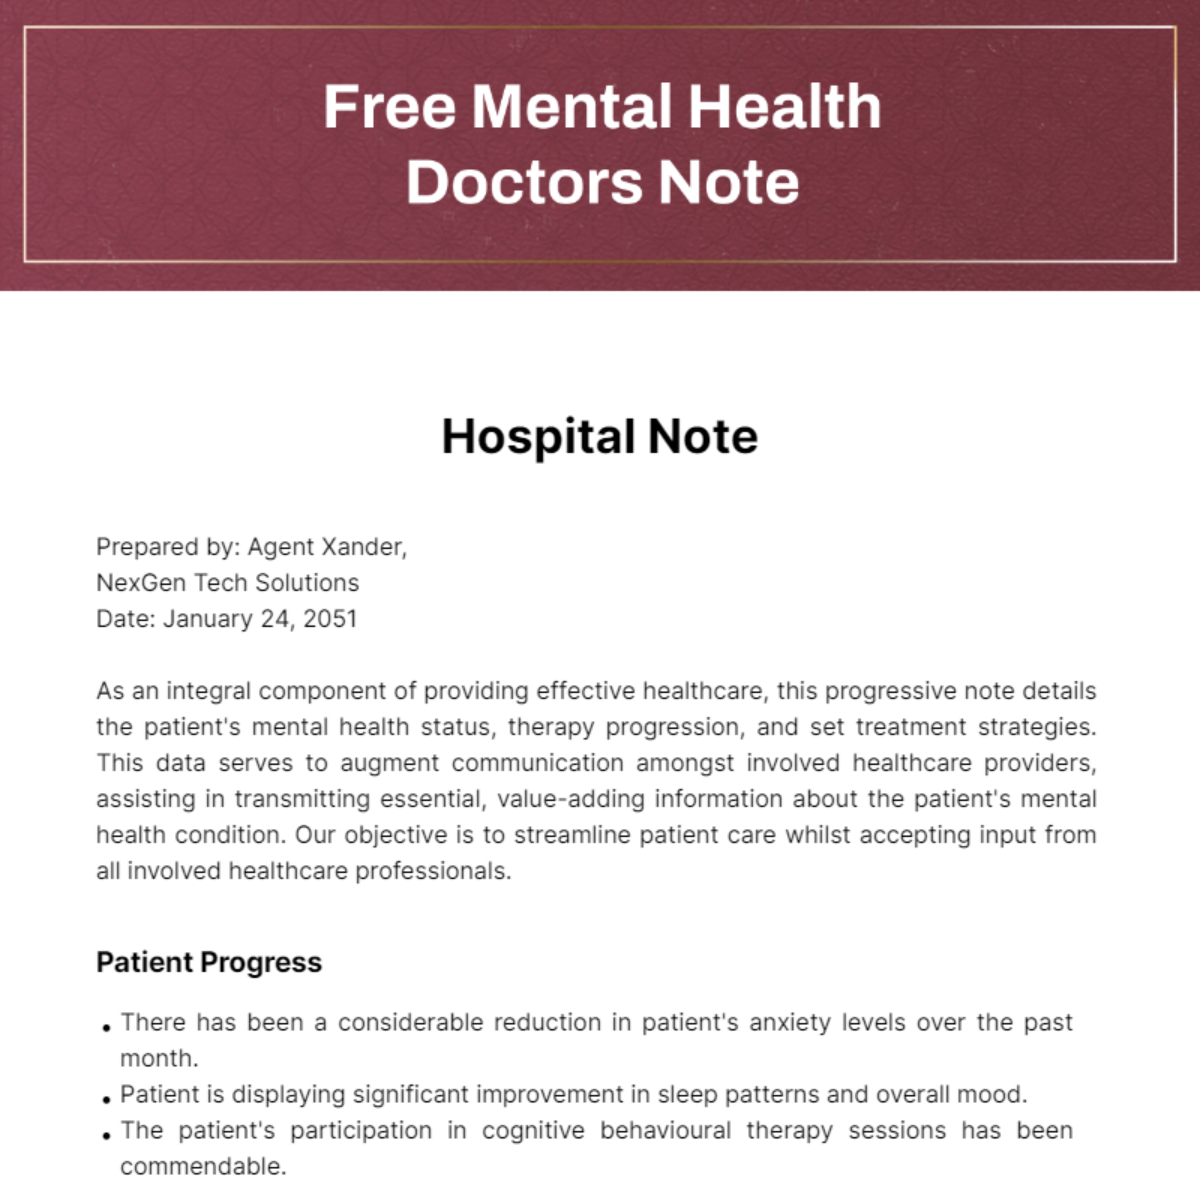 Free Mental Health Doctors Note Template